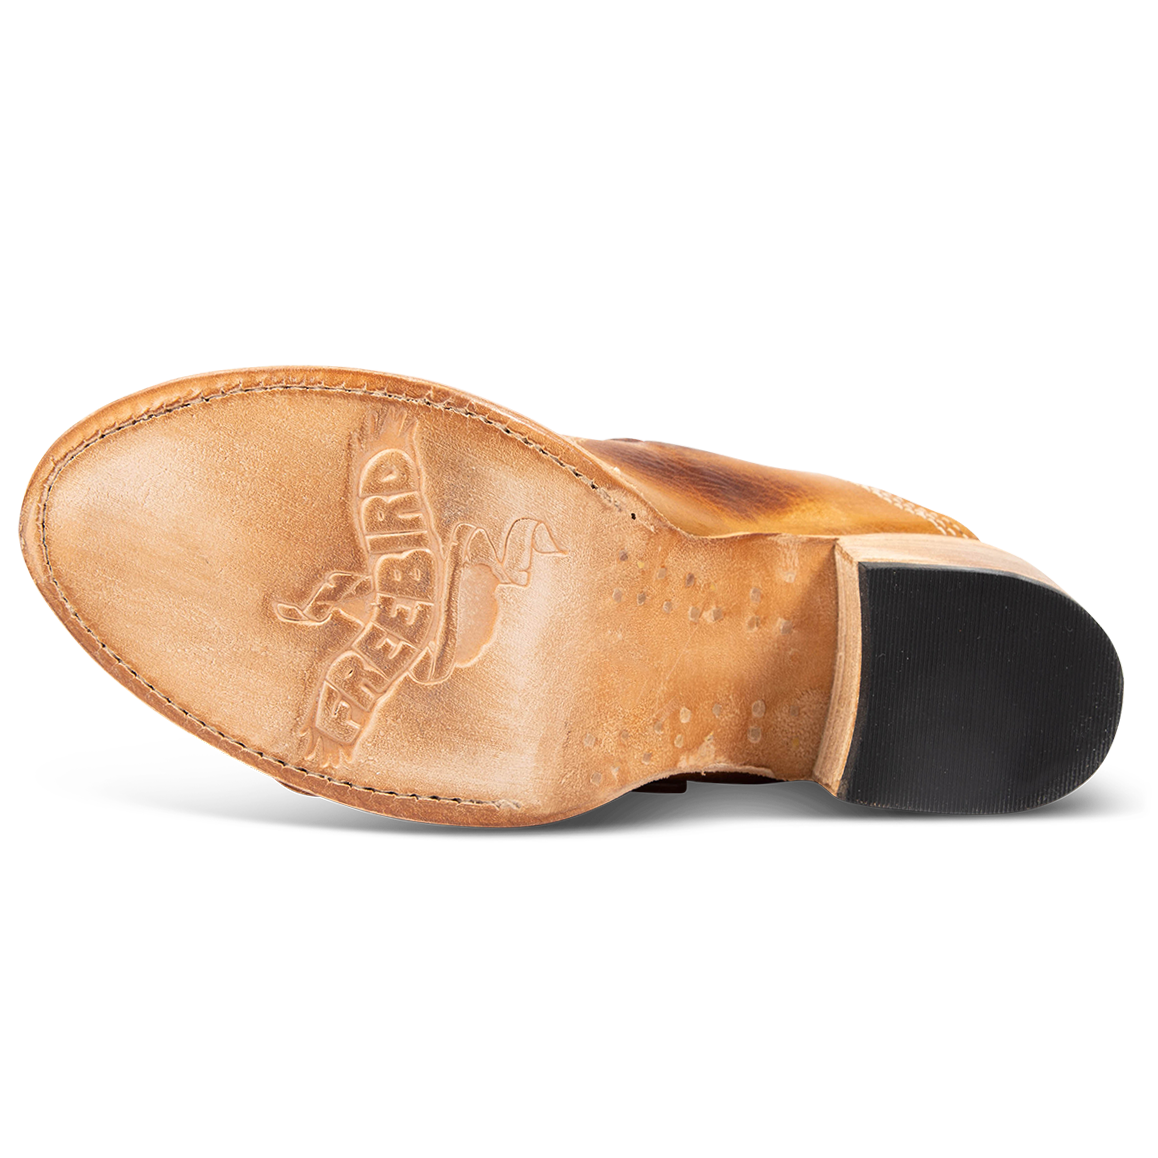 Leather sole imprinted with FREEBIRD on women's Caprice wheat sandal